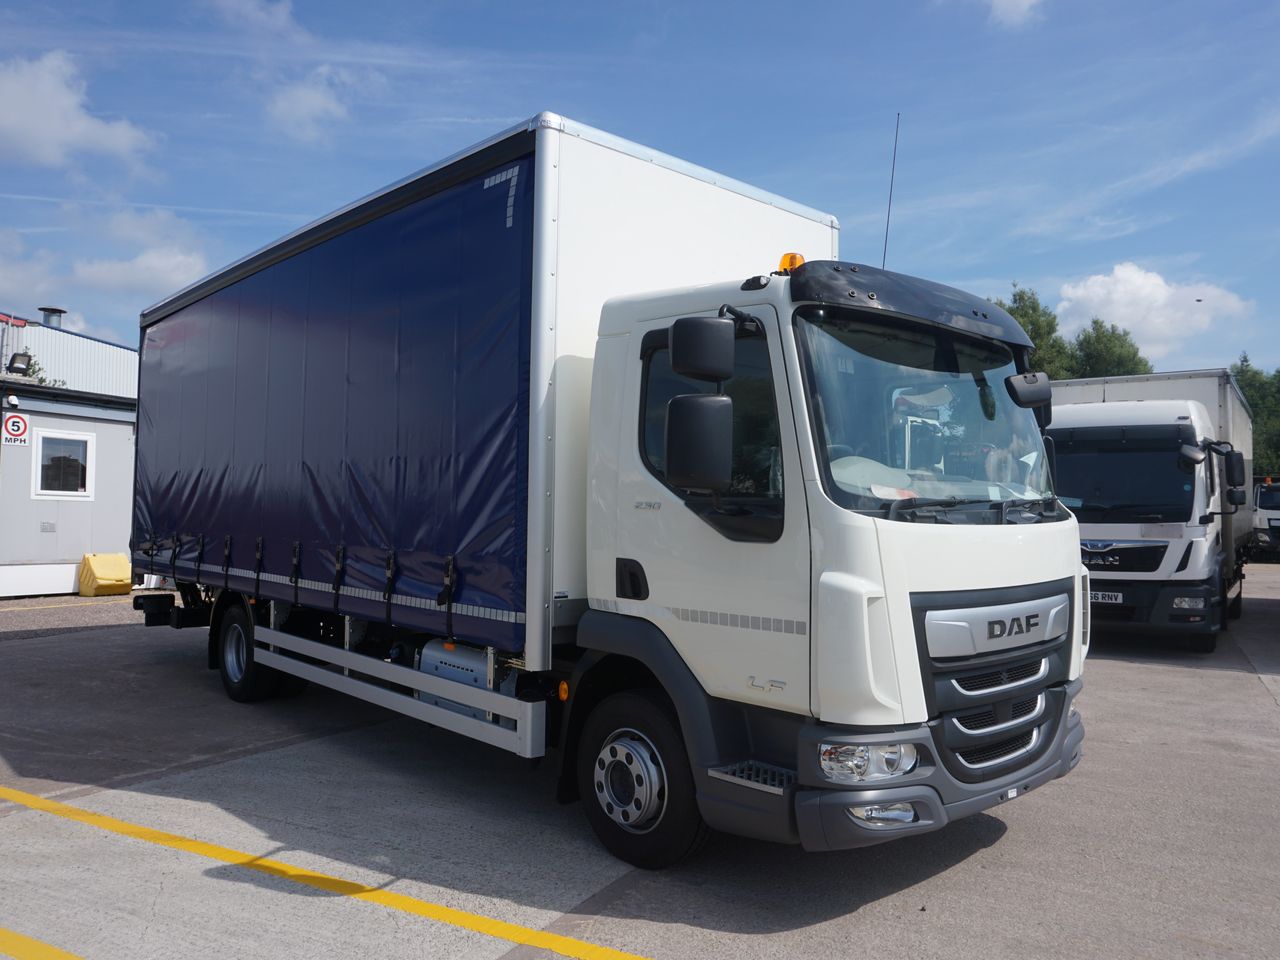 Ready to go DAF LF 230, Curtainsider, 230, 12 Tonne, Day Cab, Automatic, Cantilever Taillift, CD Player, Conspicuity tape, Multi Function Steering Wheel, Removable Curtains for Body, , -, - | for sale at MV Commercial, the UKs leading Truck, Trailers and Van supplier. (SN71YEJ 71304)